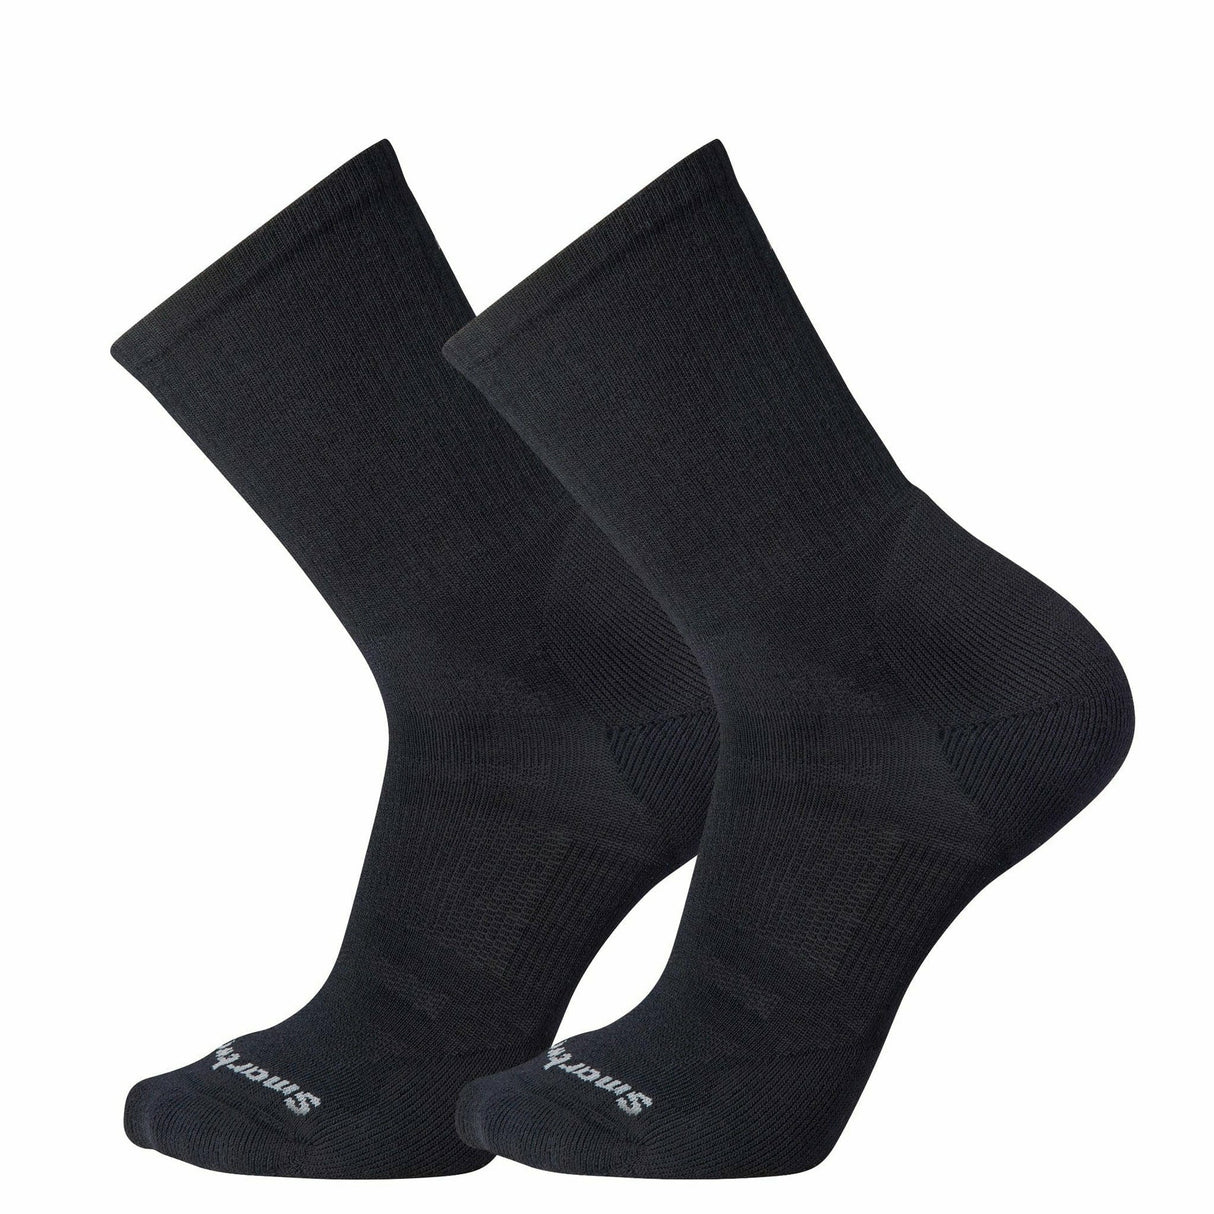 Smartwool Athletic Targeted Cushion Crew 2-Pack Socks  -  Small / Black